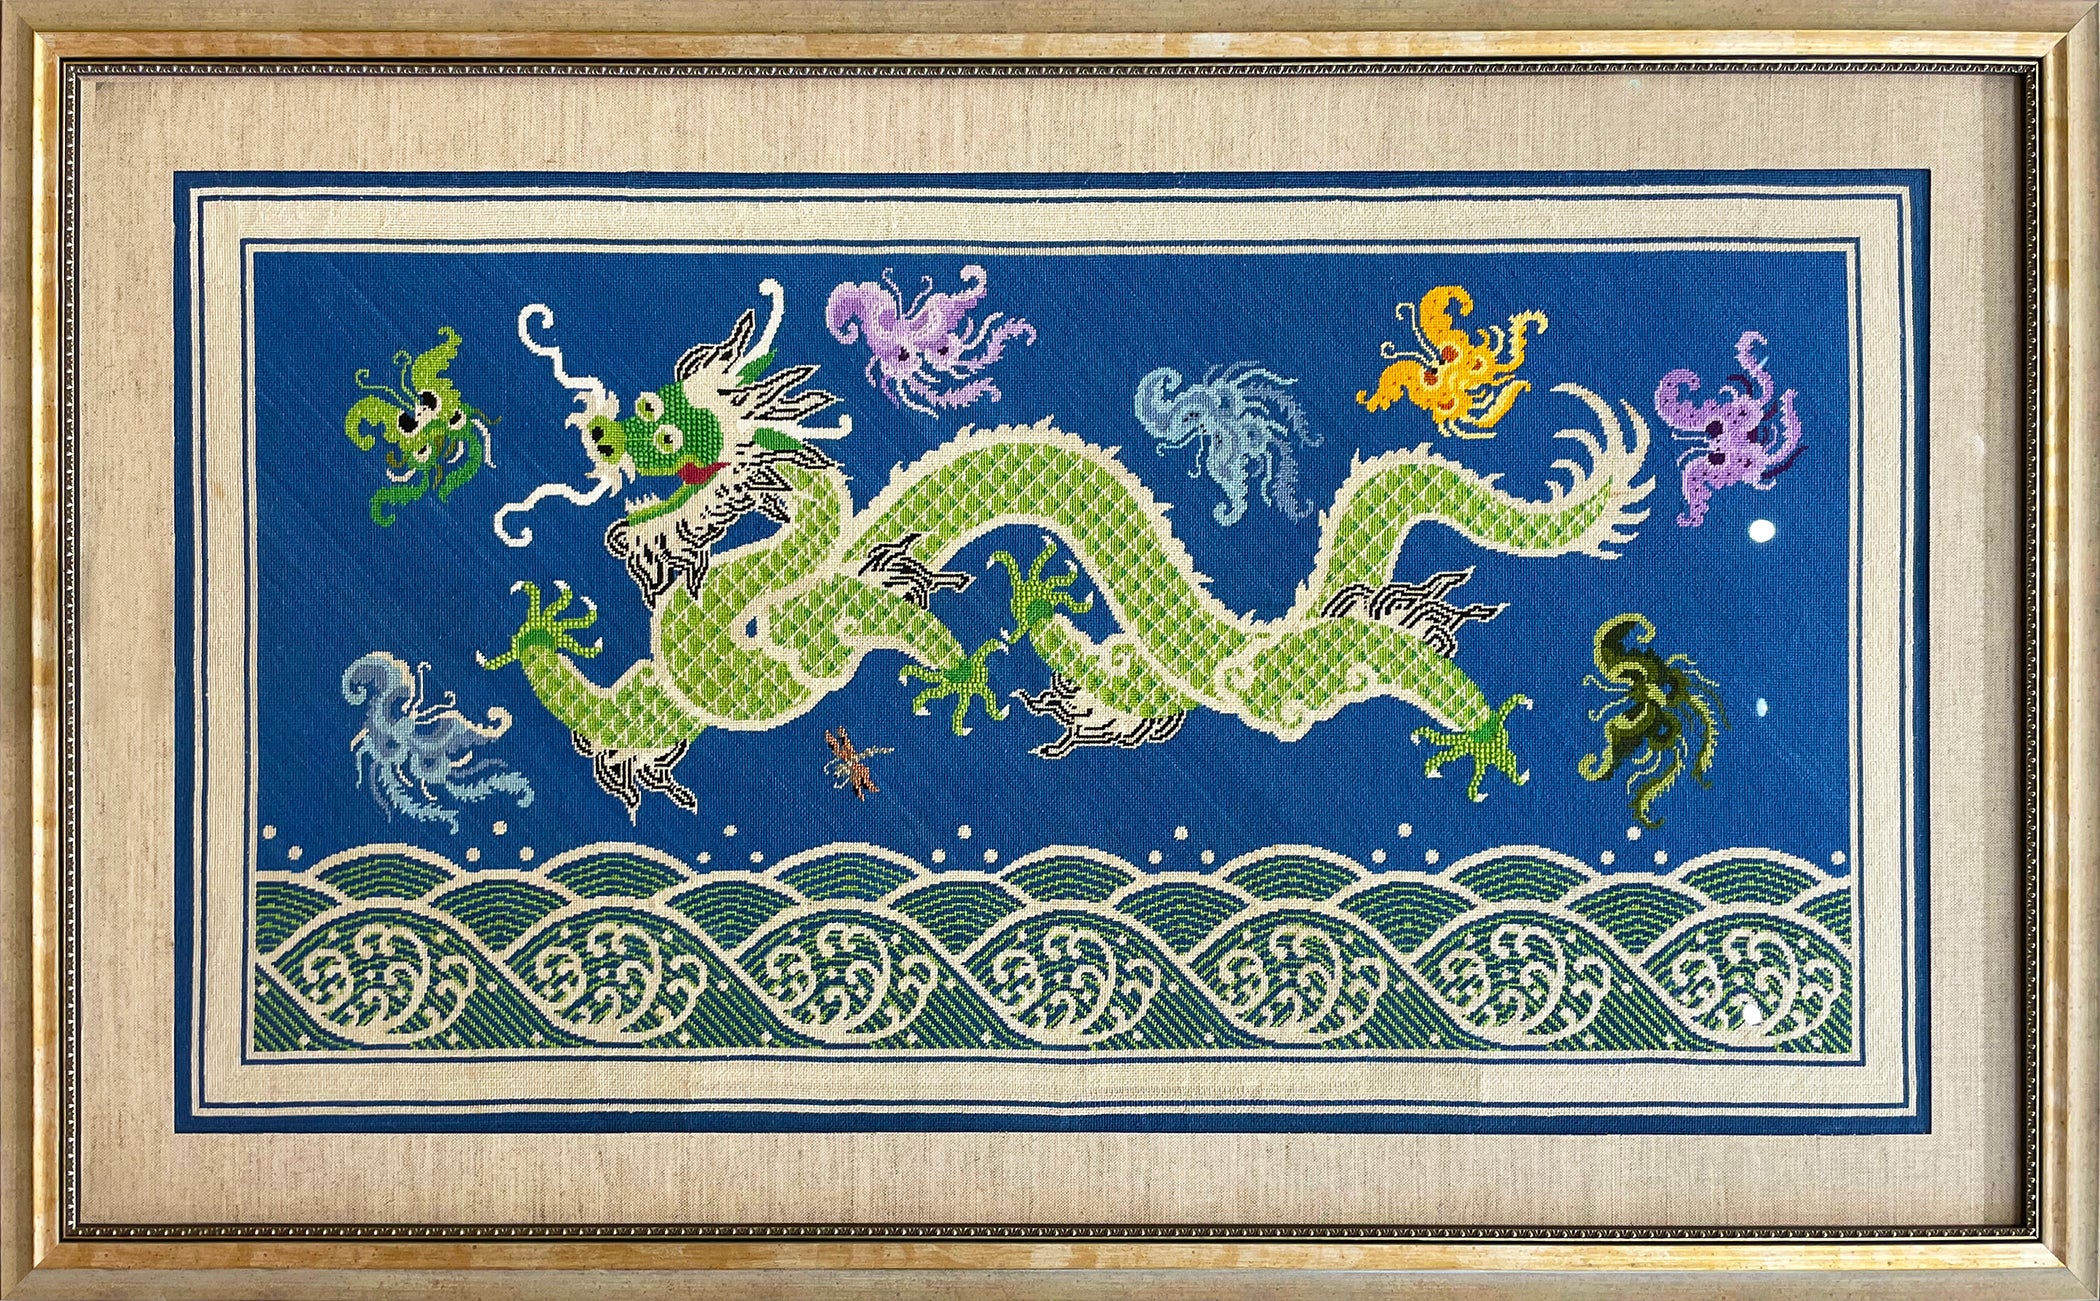 Large needlepoint of a dragon and fantastical creatures over a rolling sea framed in a gold frame with a black and gold fillet.